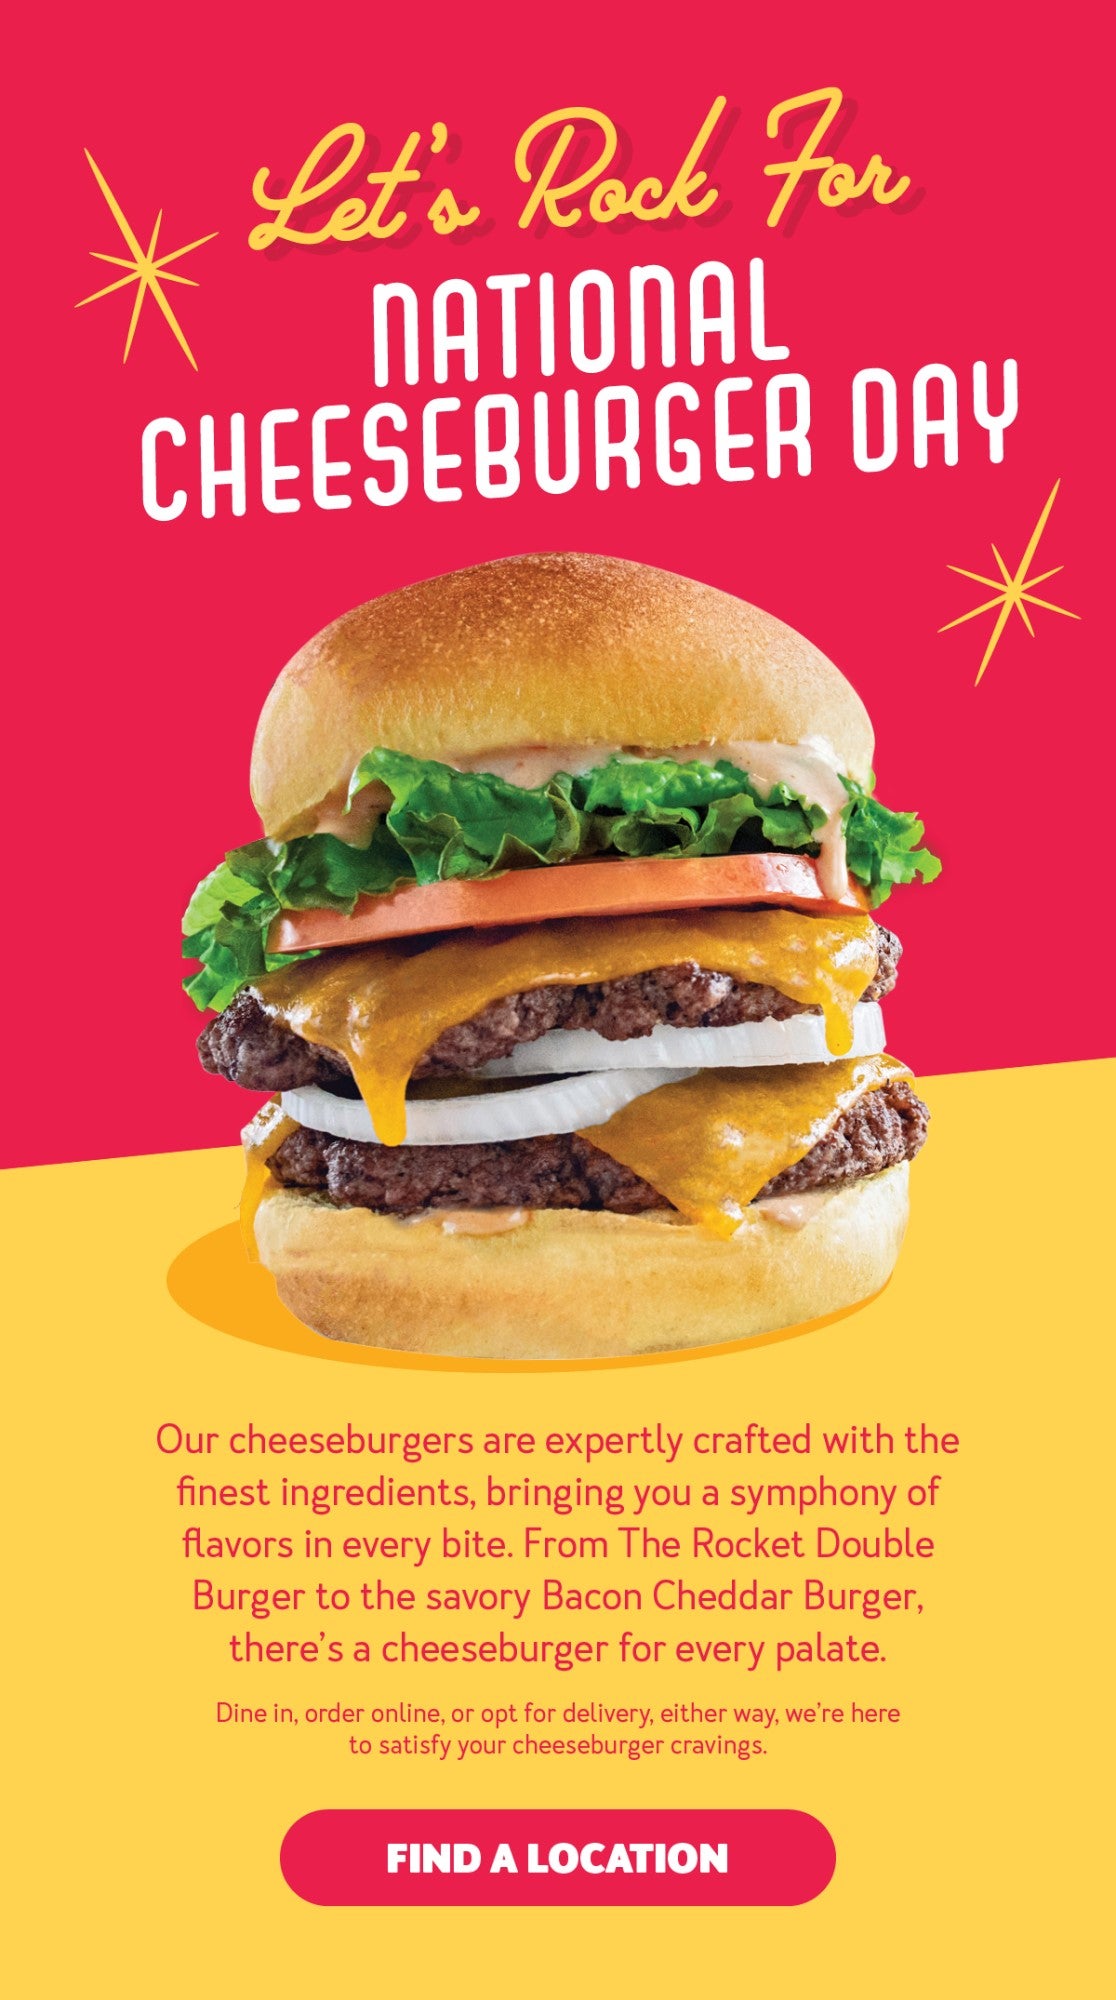 Celebrate National Cheeseburger Day with us!